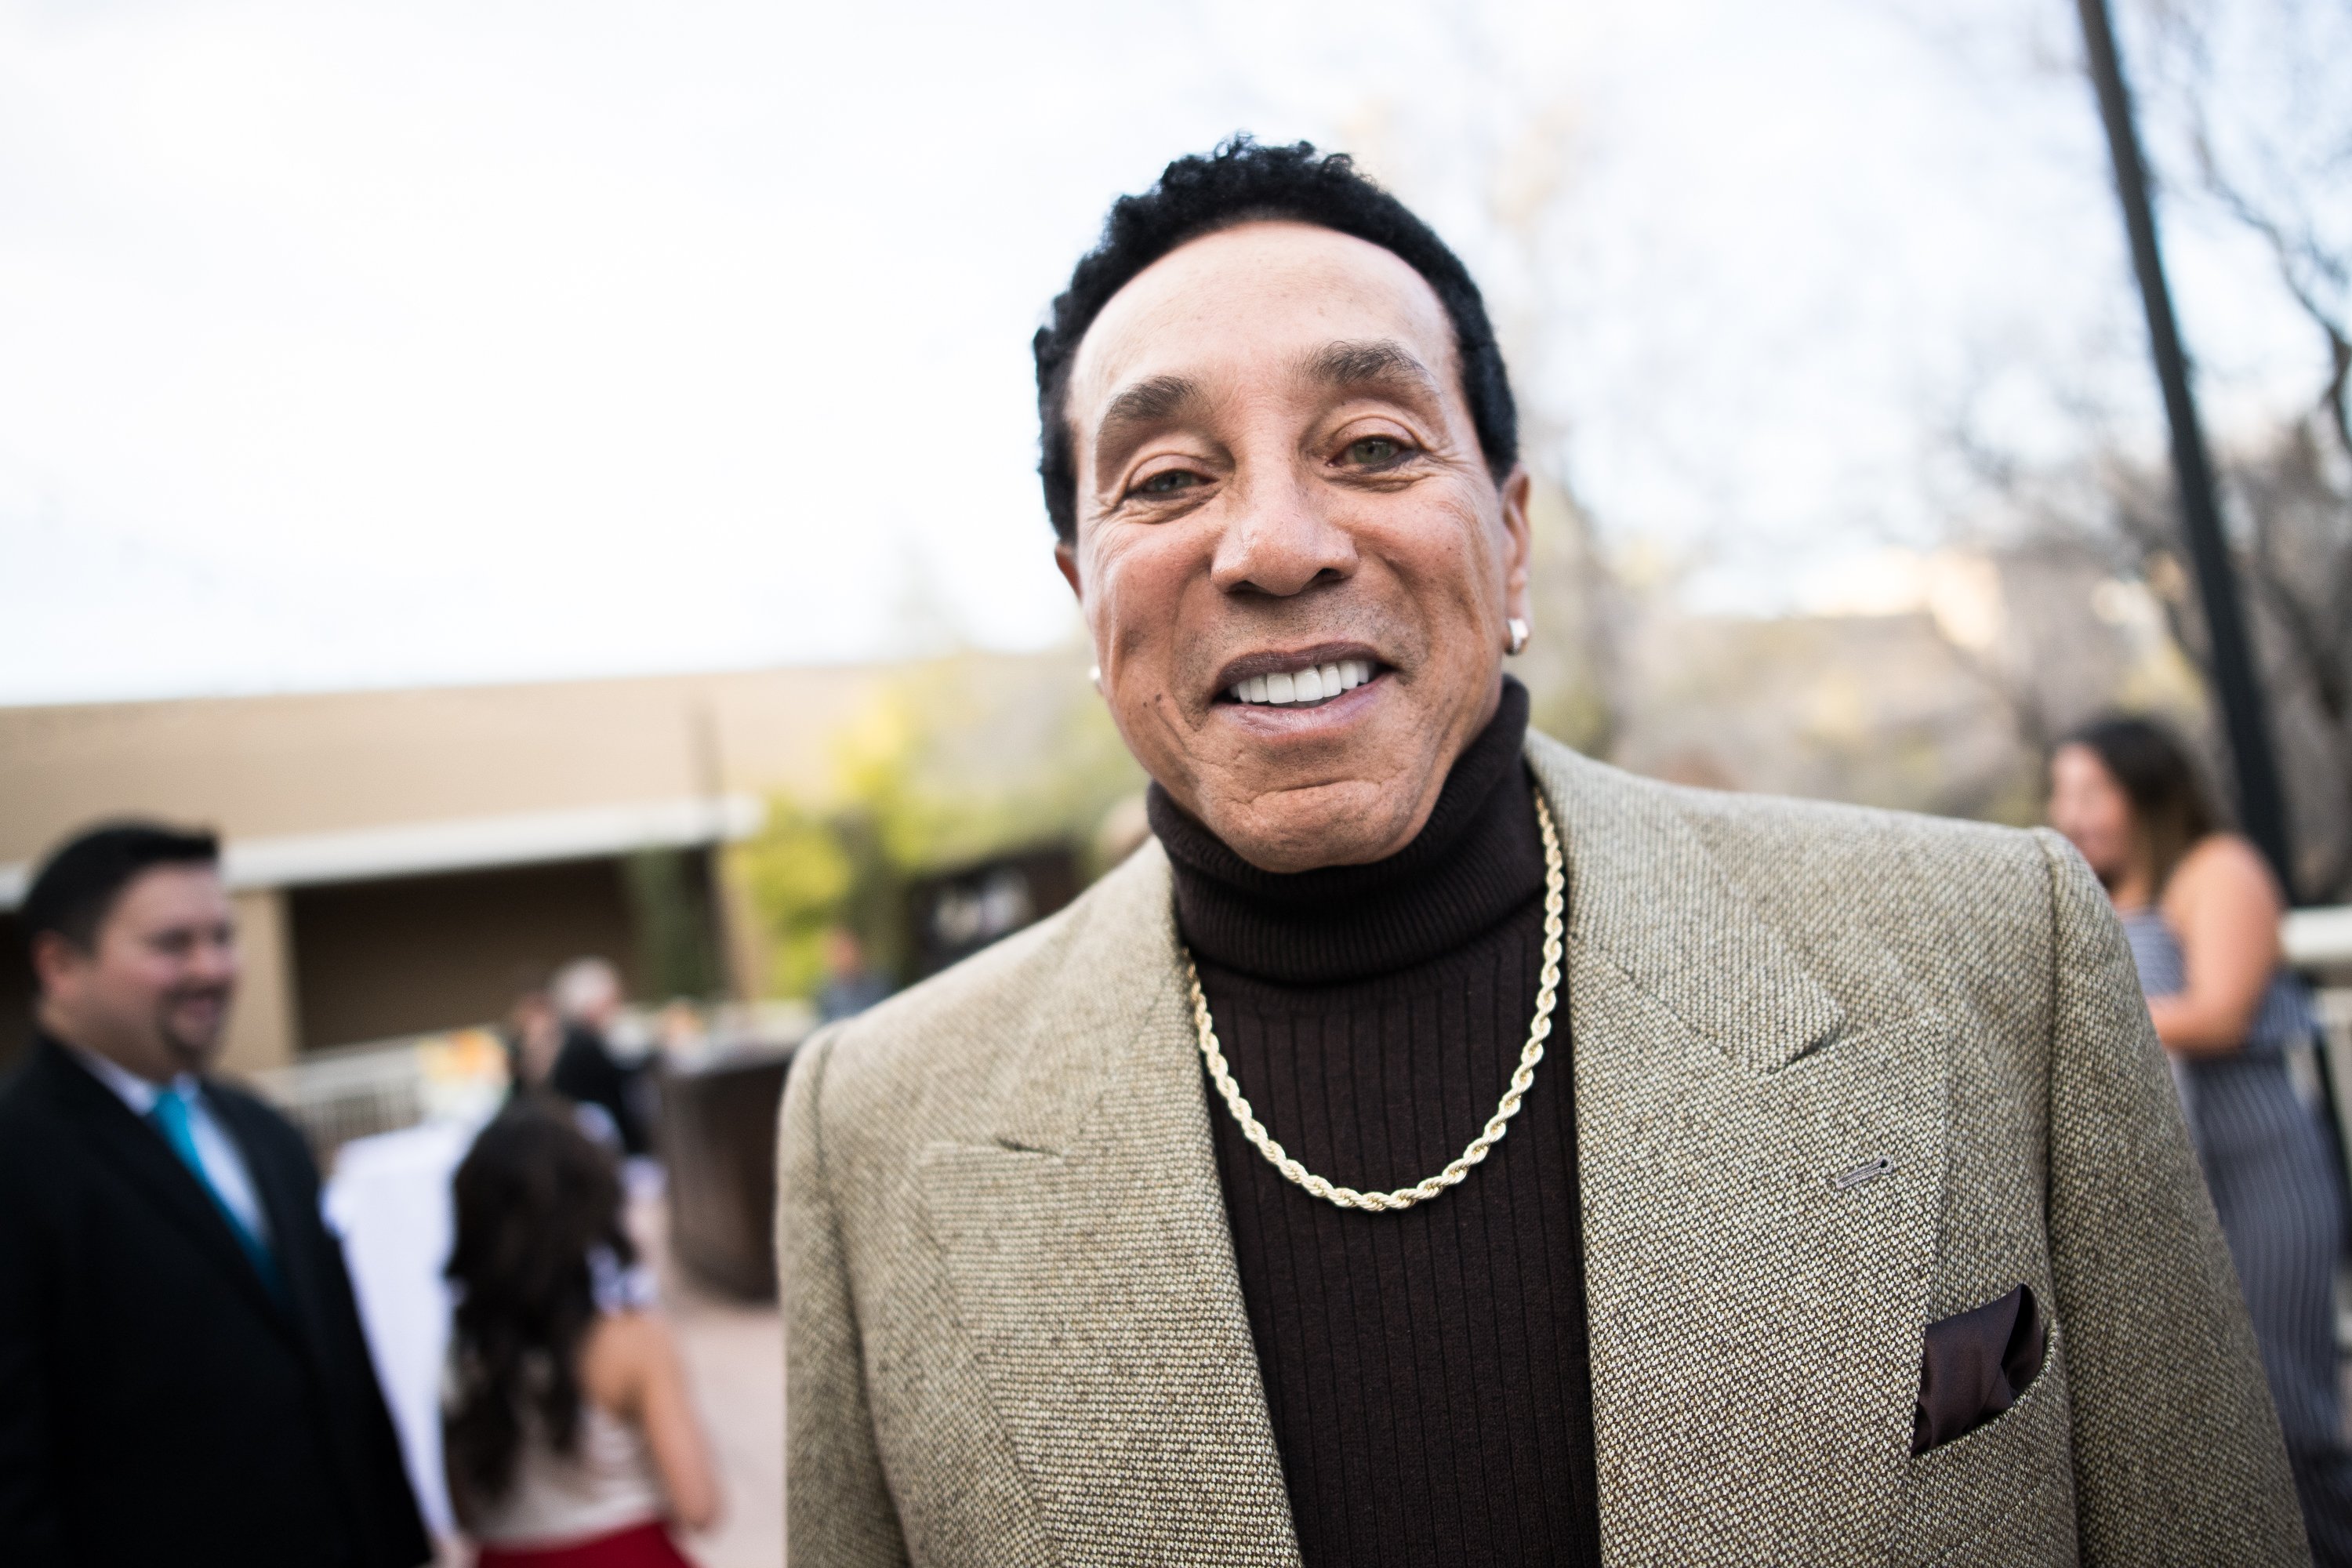 Smokey Robinson attends the Celebrity Fight Night's Founders Club Dinner on March 9, 2018 in Phoenix, Arizona. | Photo: GettyImages